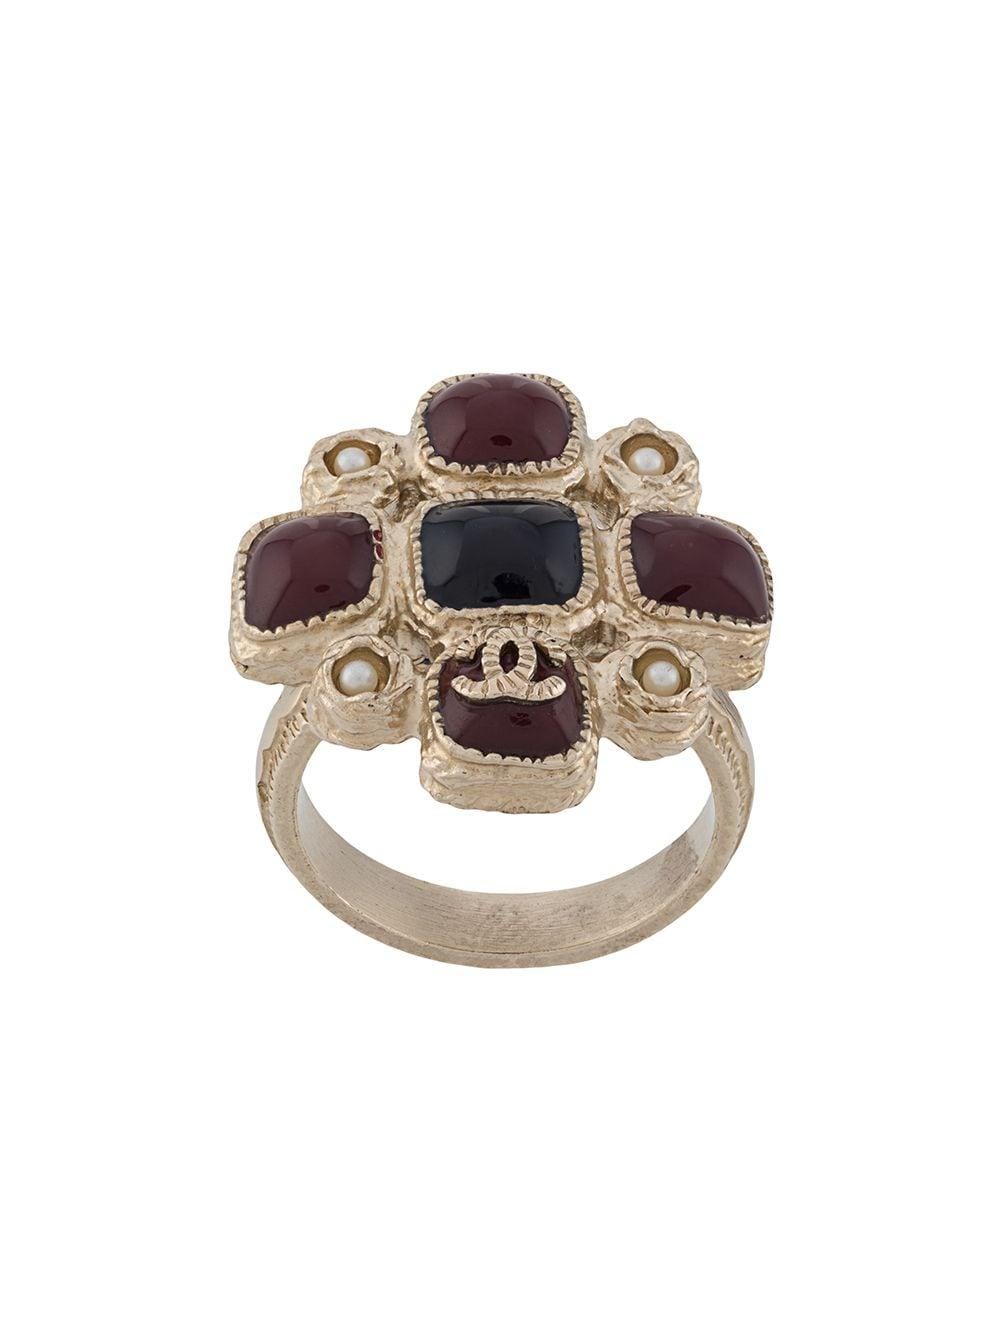 Crafted in France from gold-plated metal, this ornate vintage ring from Chanel showcases a regal maltese cross design, an embossed finish and an easy slip-on style. For an added touch of classic sophistication, this statement accessory is adorned by